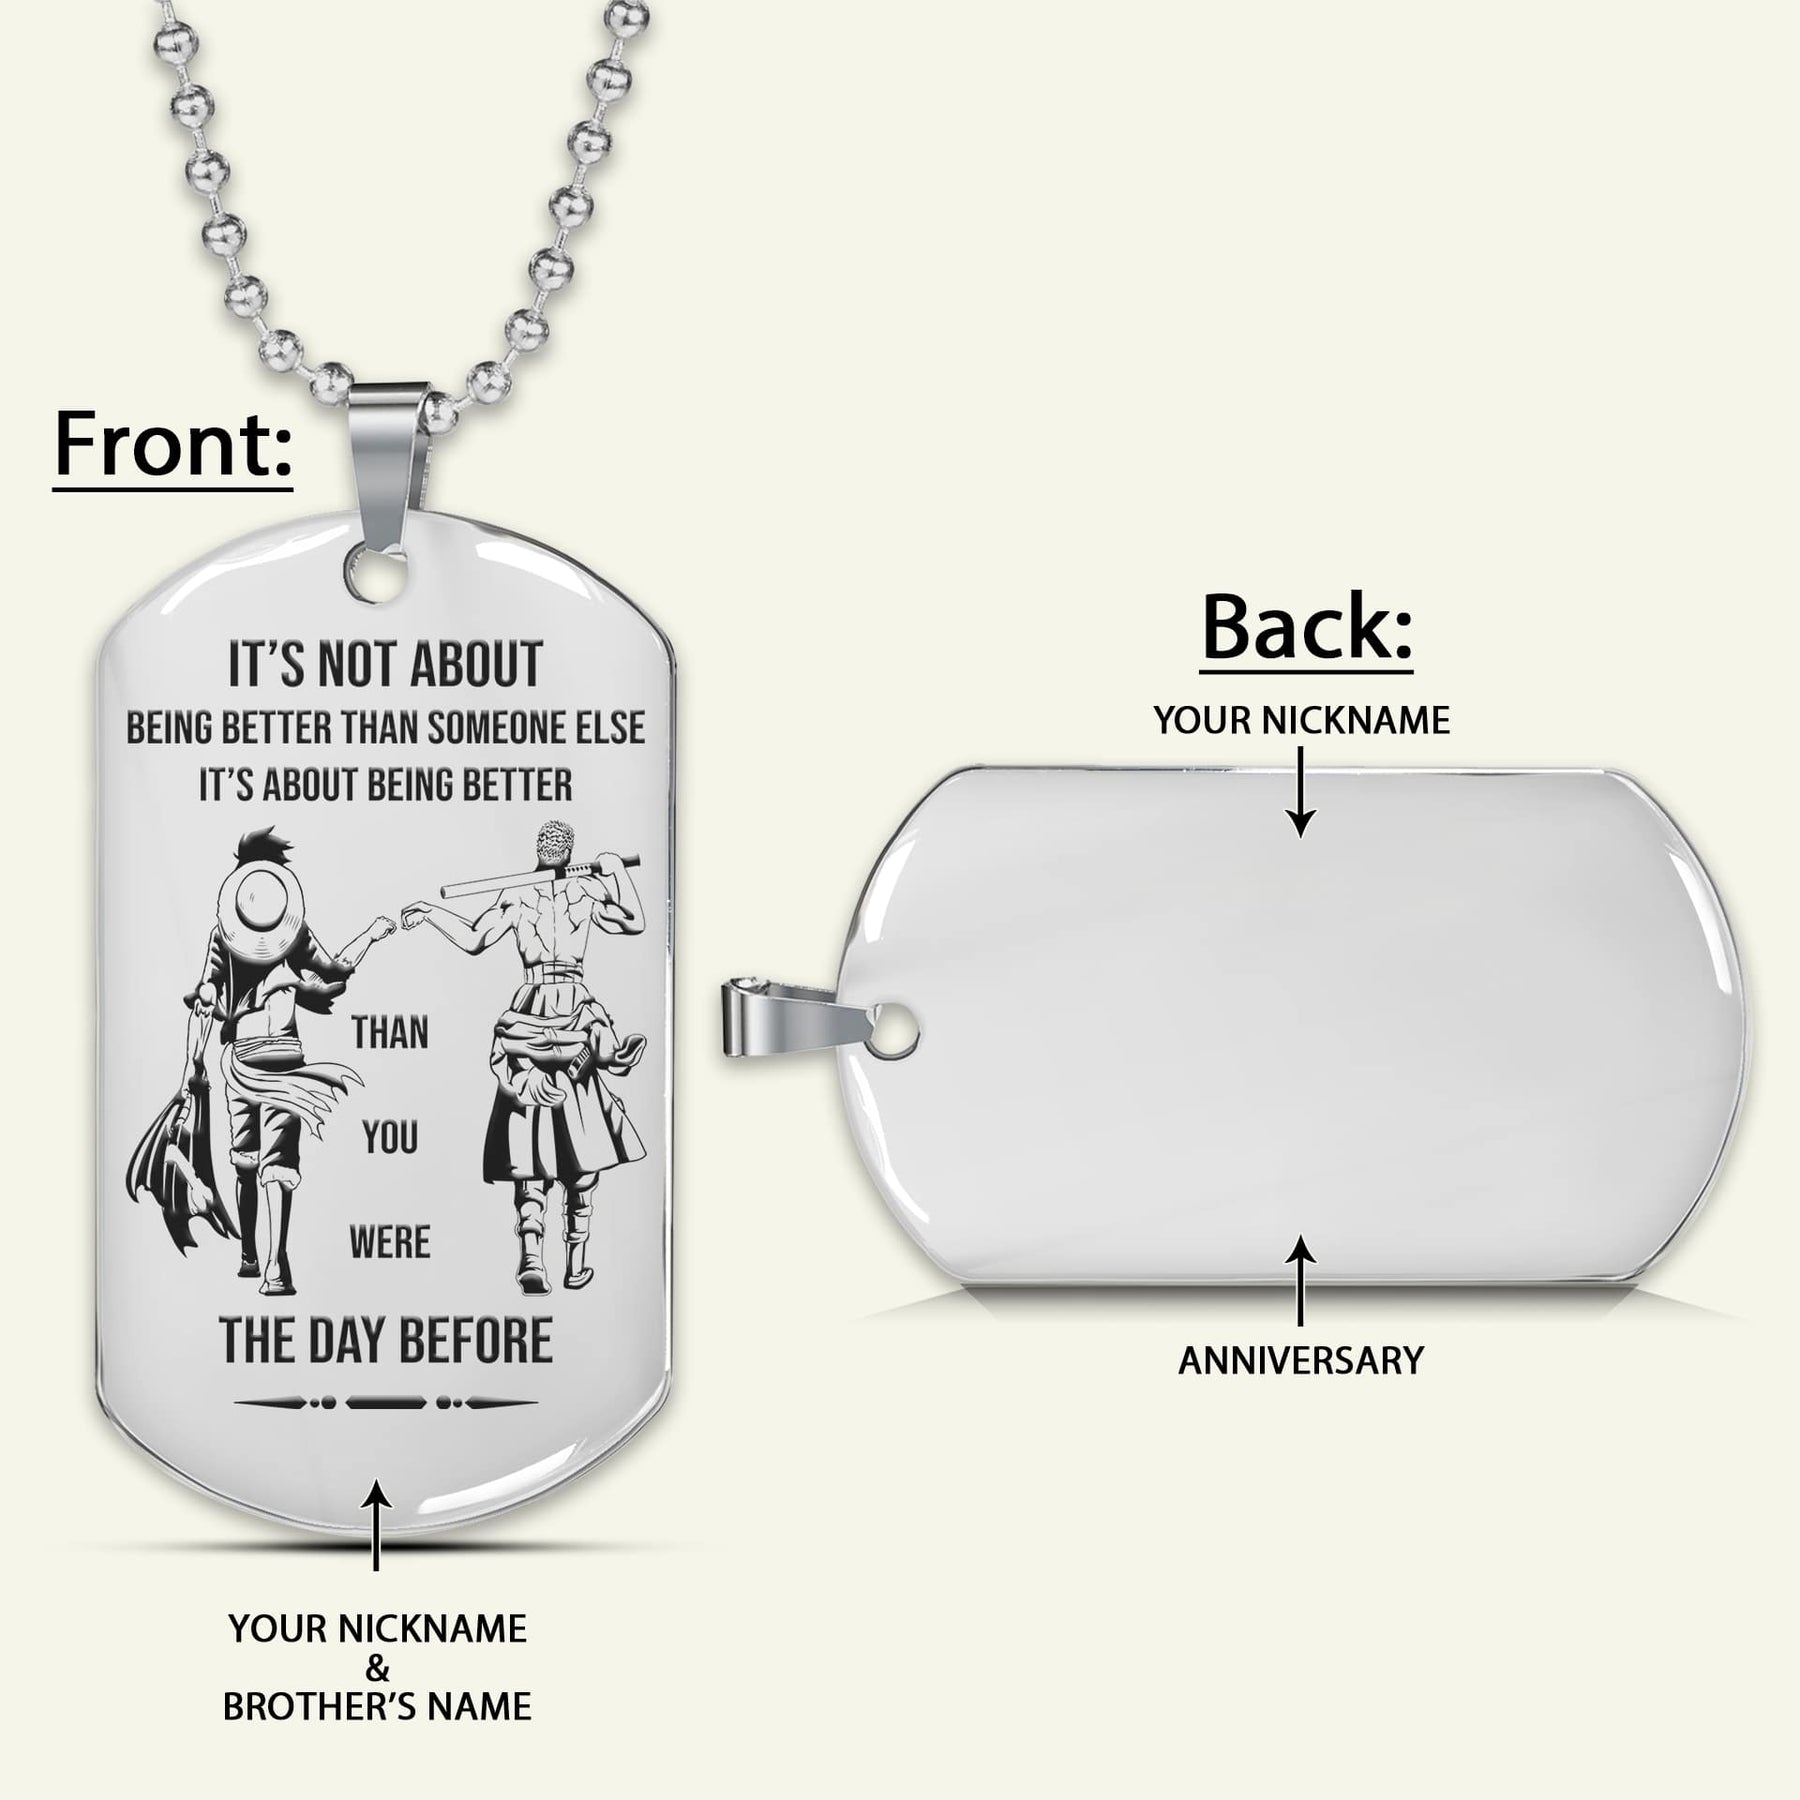 OPD016 - It's About Being Better Than You Were The Day Before - Monkey D. Luffy - Roronoa Zoro - One Piece Dog Tag - Engrave Silver Dog Tag